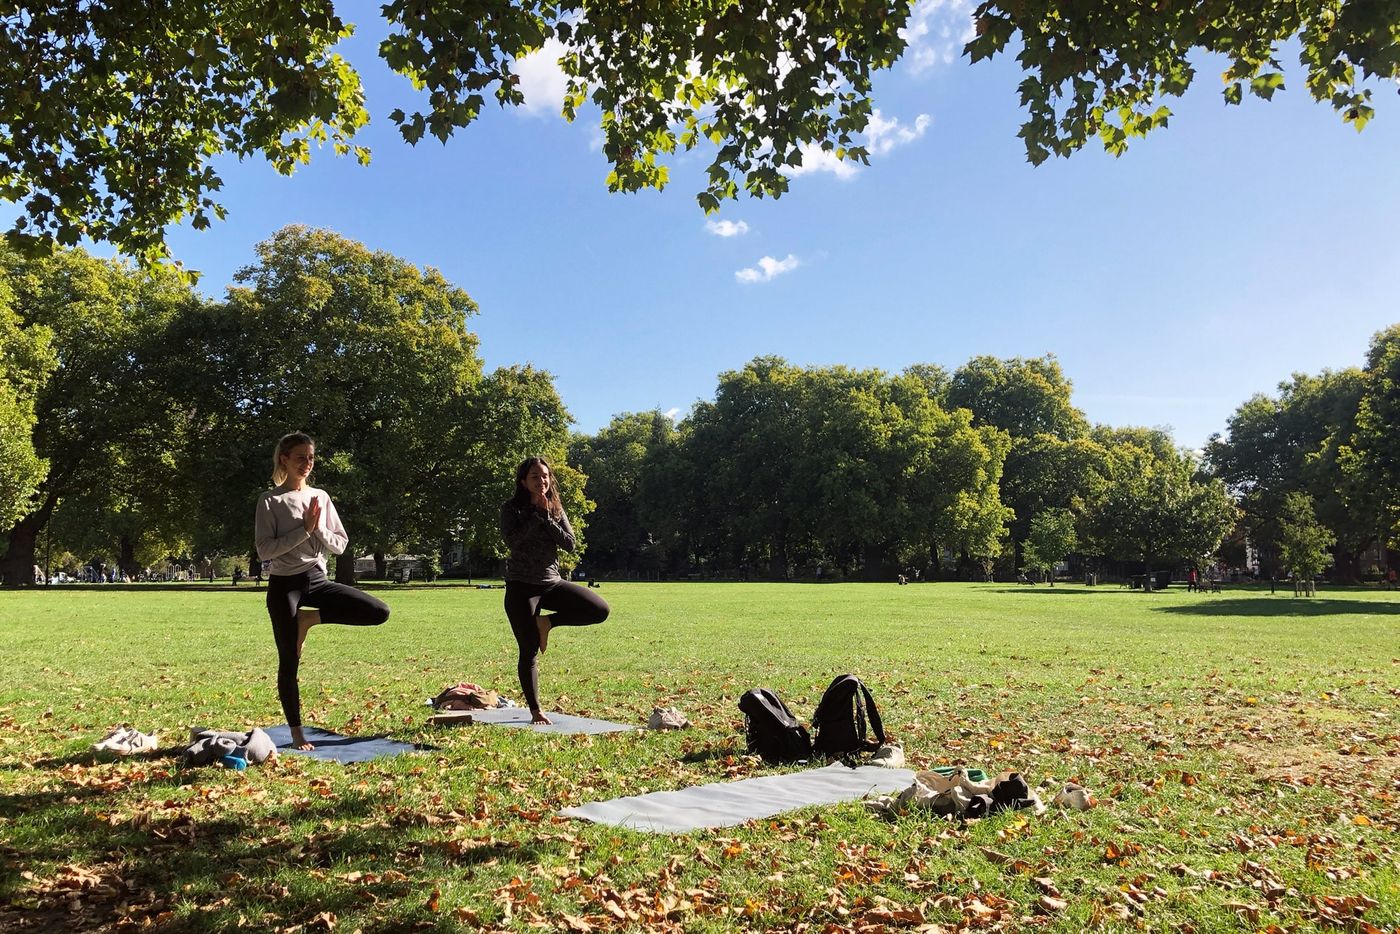 That's a wrap! The sun came out in London Fields during this last park class for the year. See you in 2023, yoga classes outside will be back as soon as it's warm enough again 🌞️